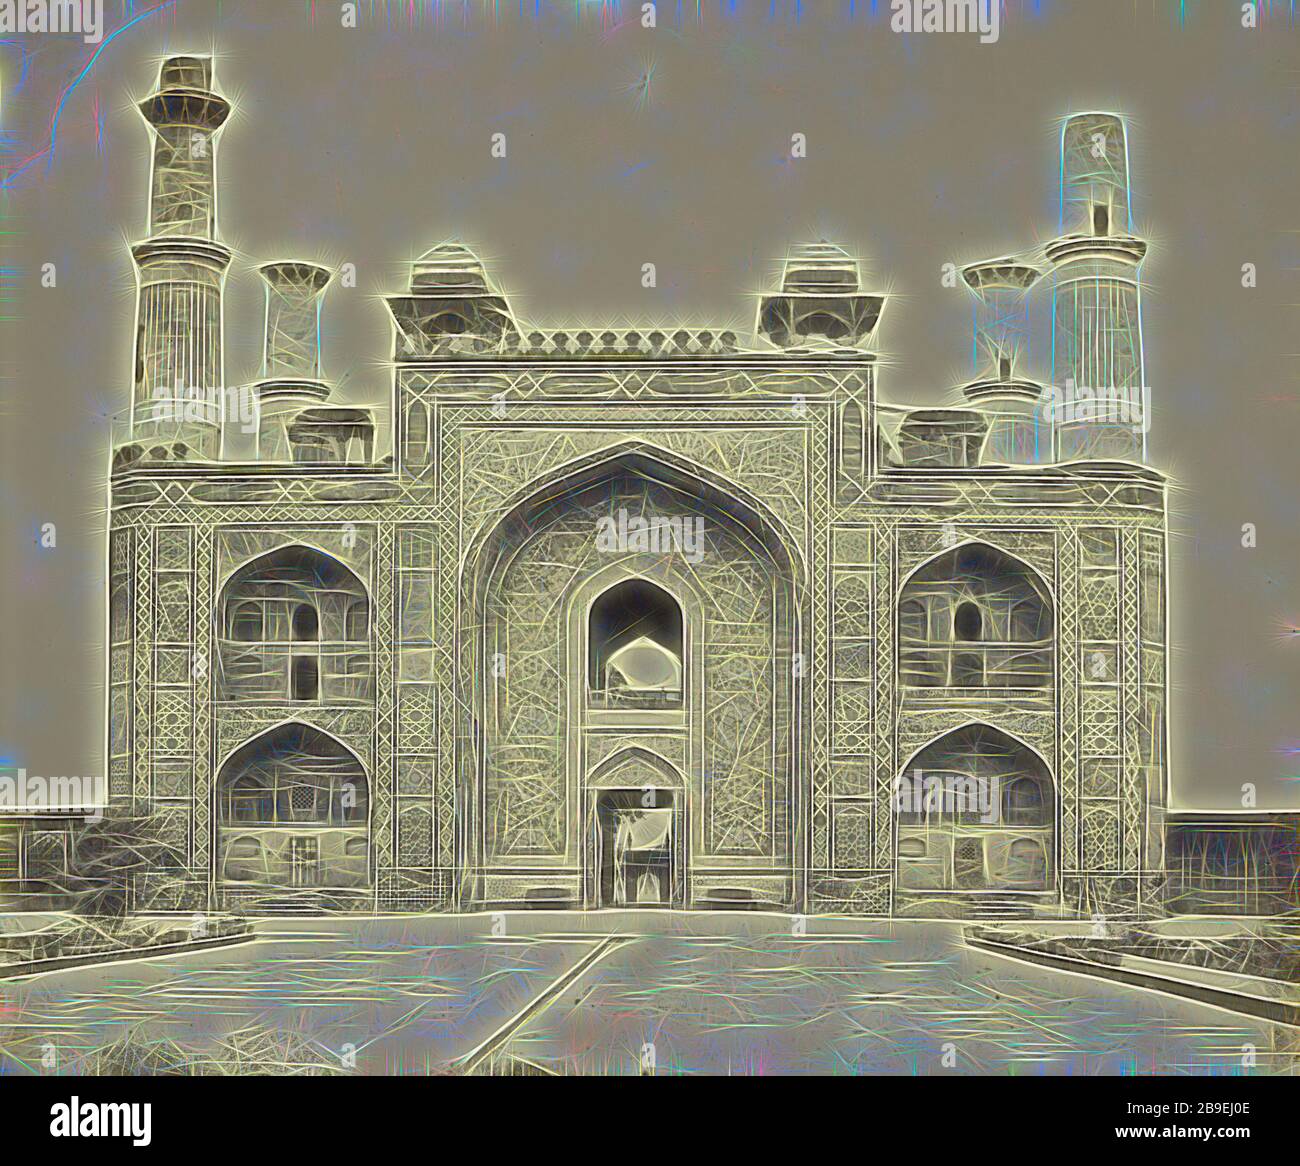 Gateway of Akbar's Tomb, Felice Beato (English, born Italy, 1832 - 1909), Henry Hering (British, 1814 - 1893), India, about April 1859, Albumen silver print, Reimagined by Gibon, design of warm cheerful glowing of brightness and light rays radiance. Classic art reinvented with a modern twist. Photography inspired by futurism, embracing dynamic energy of modern technology, movement, speed and revolutionize culture. Stock Photo